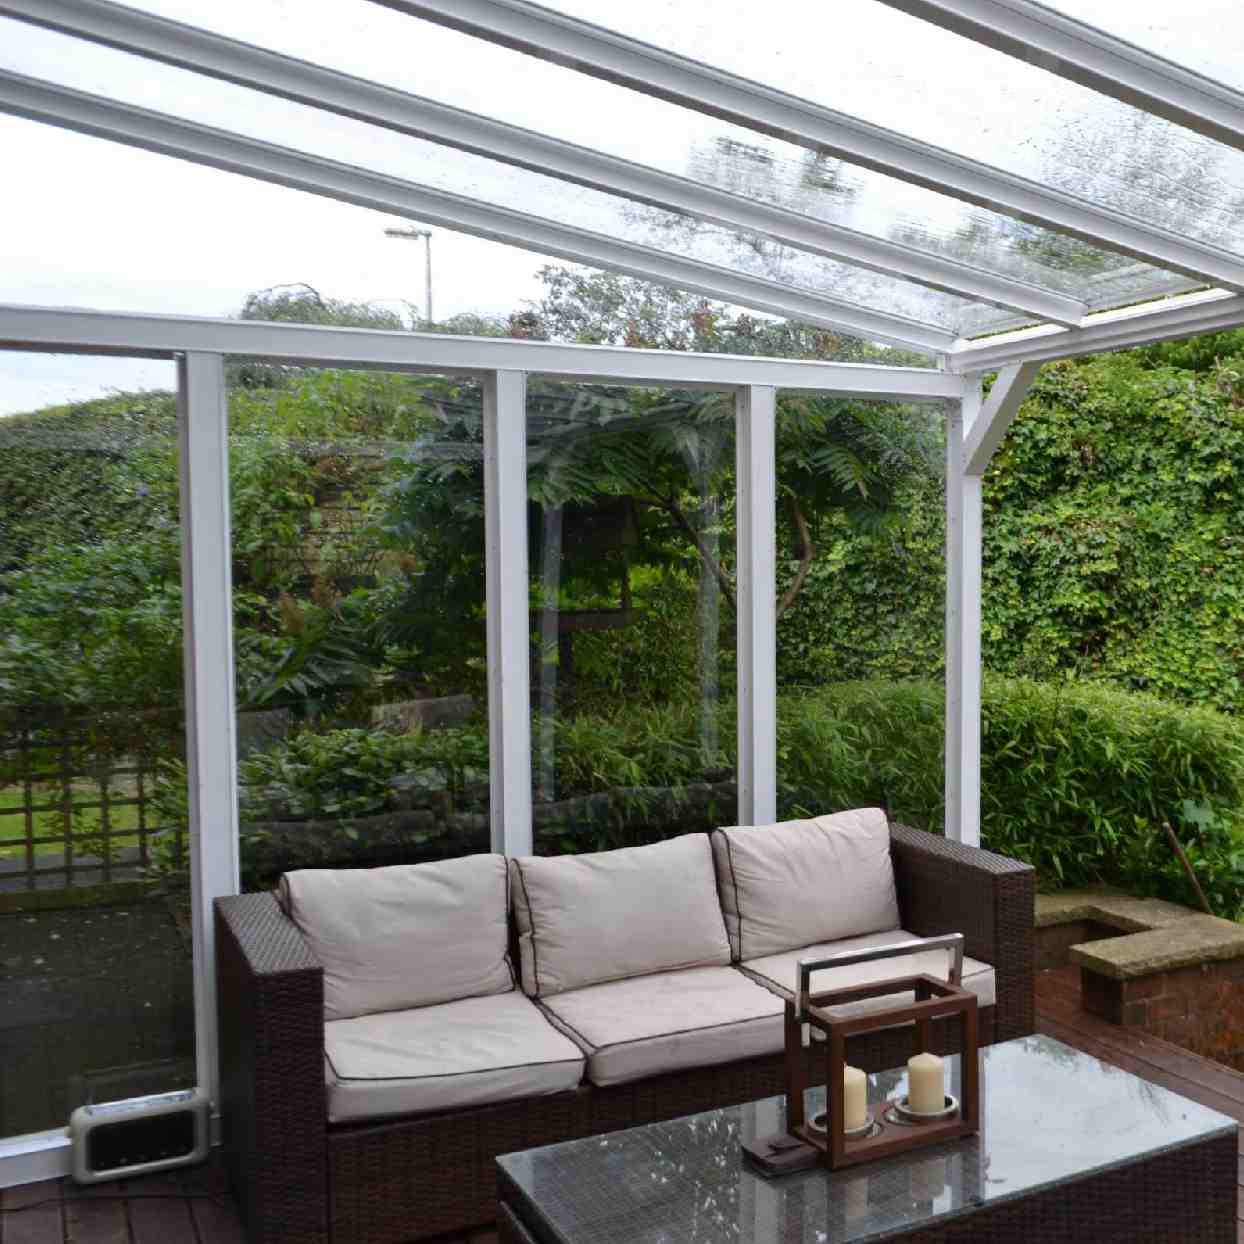 Buy Omega Verandah White with 16mm Polycarbonate Glazing - 12.0m (W) x 2.0m (P), (5) Supporting Posts online today